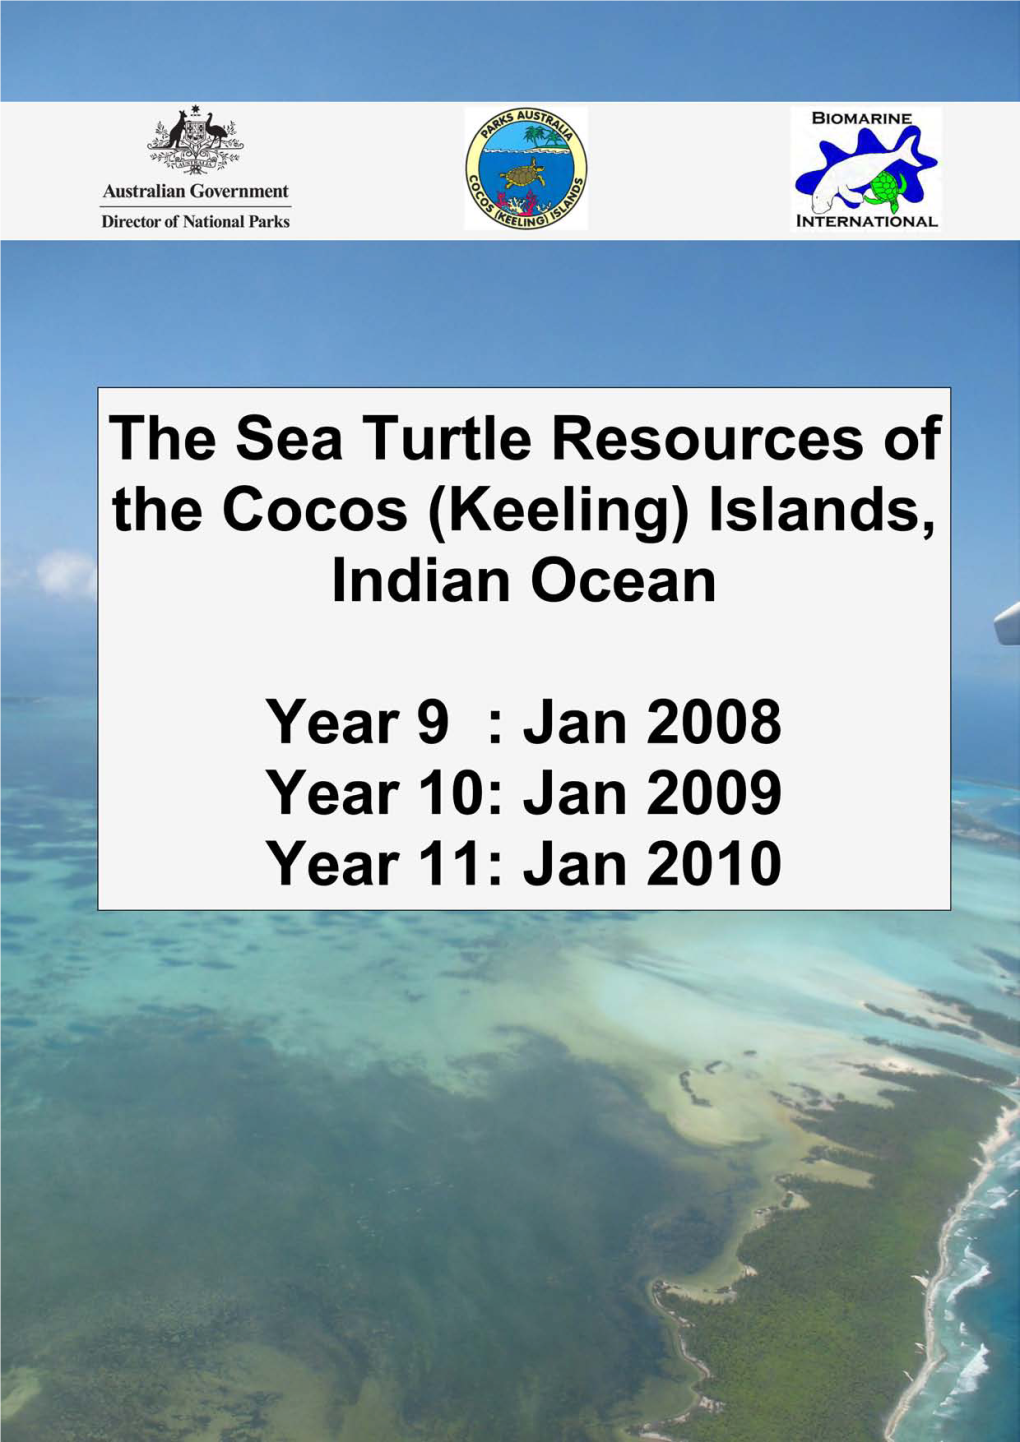 The Sea Turtle Resources of the Cocos (Keeling) Islands, Indian Ocean